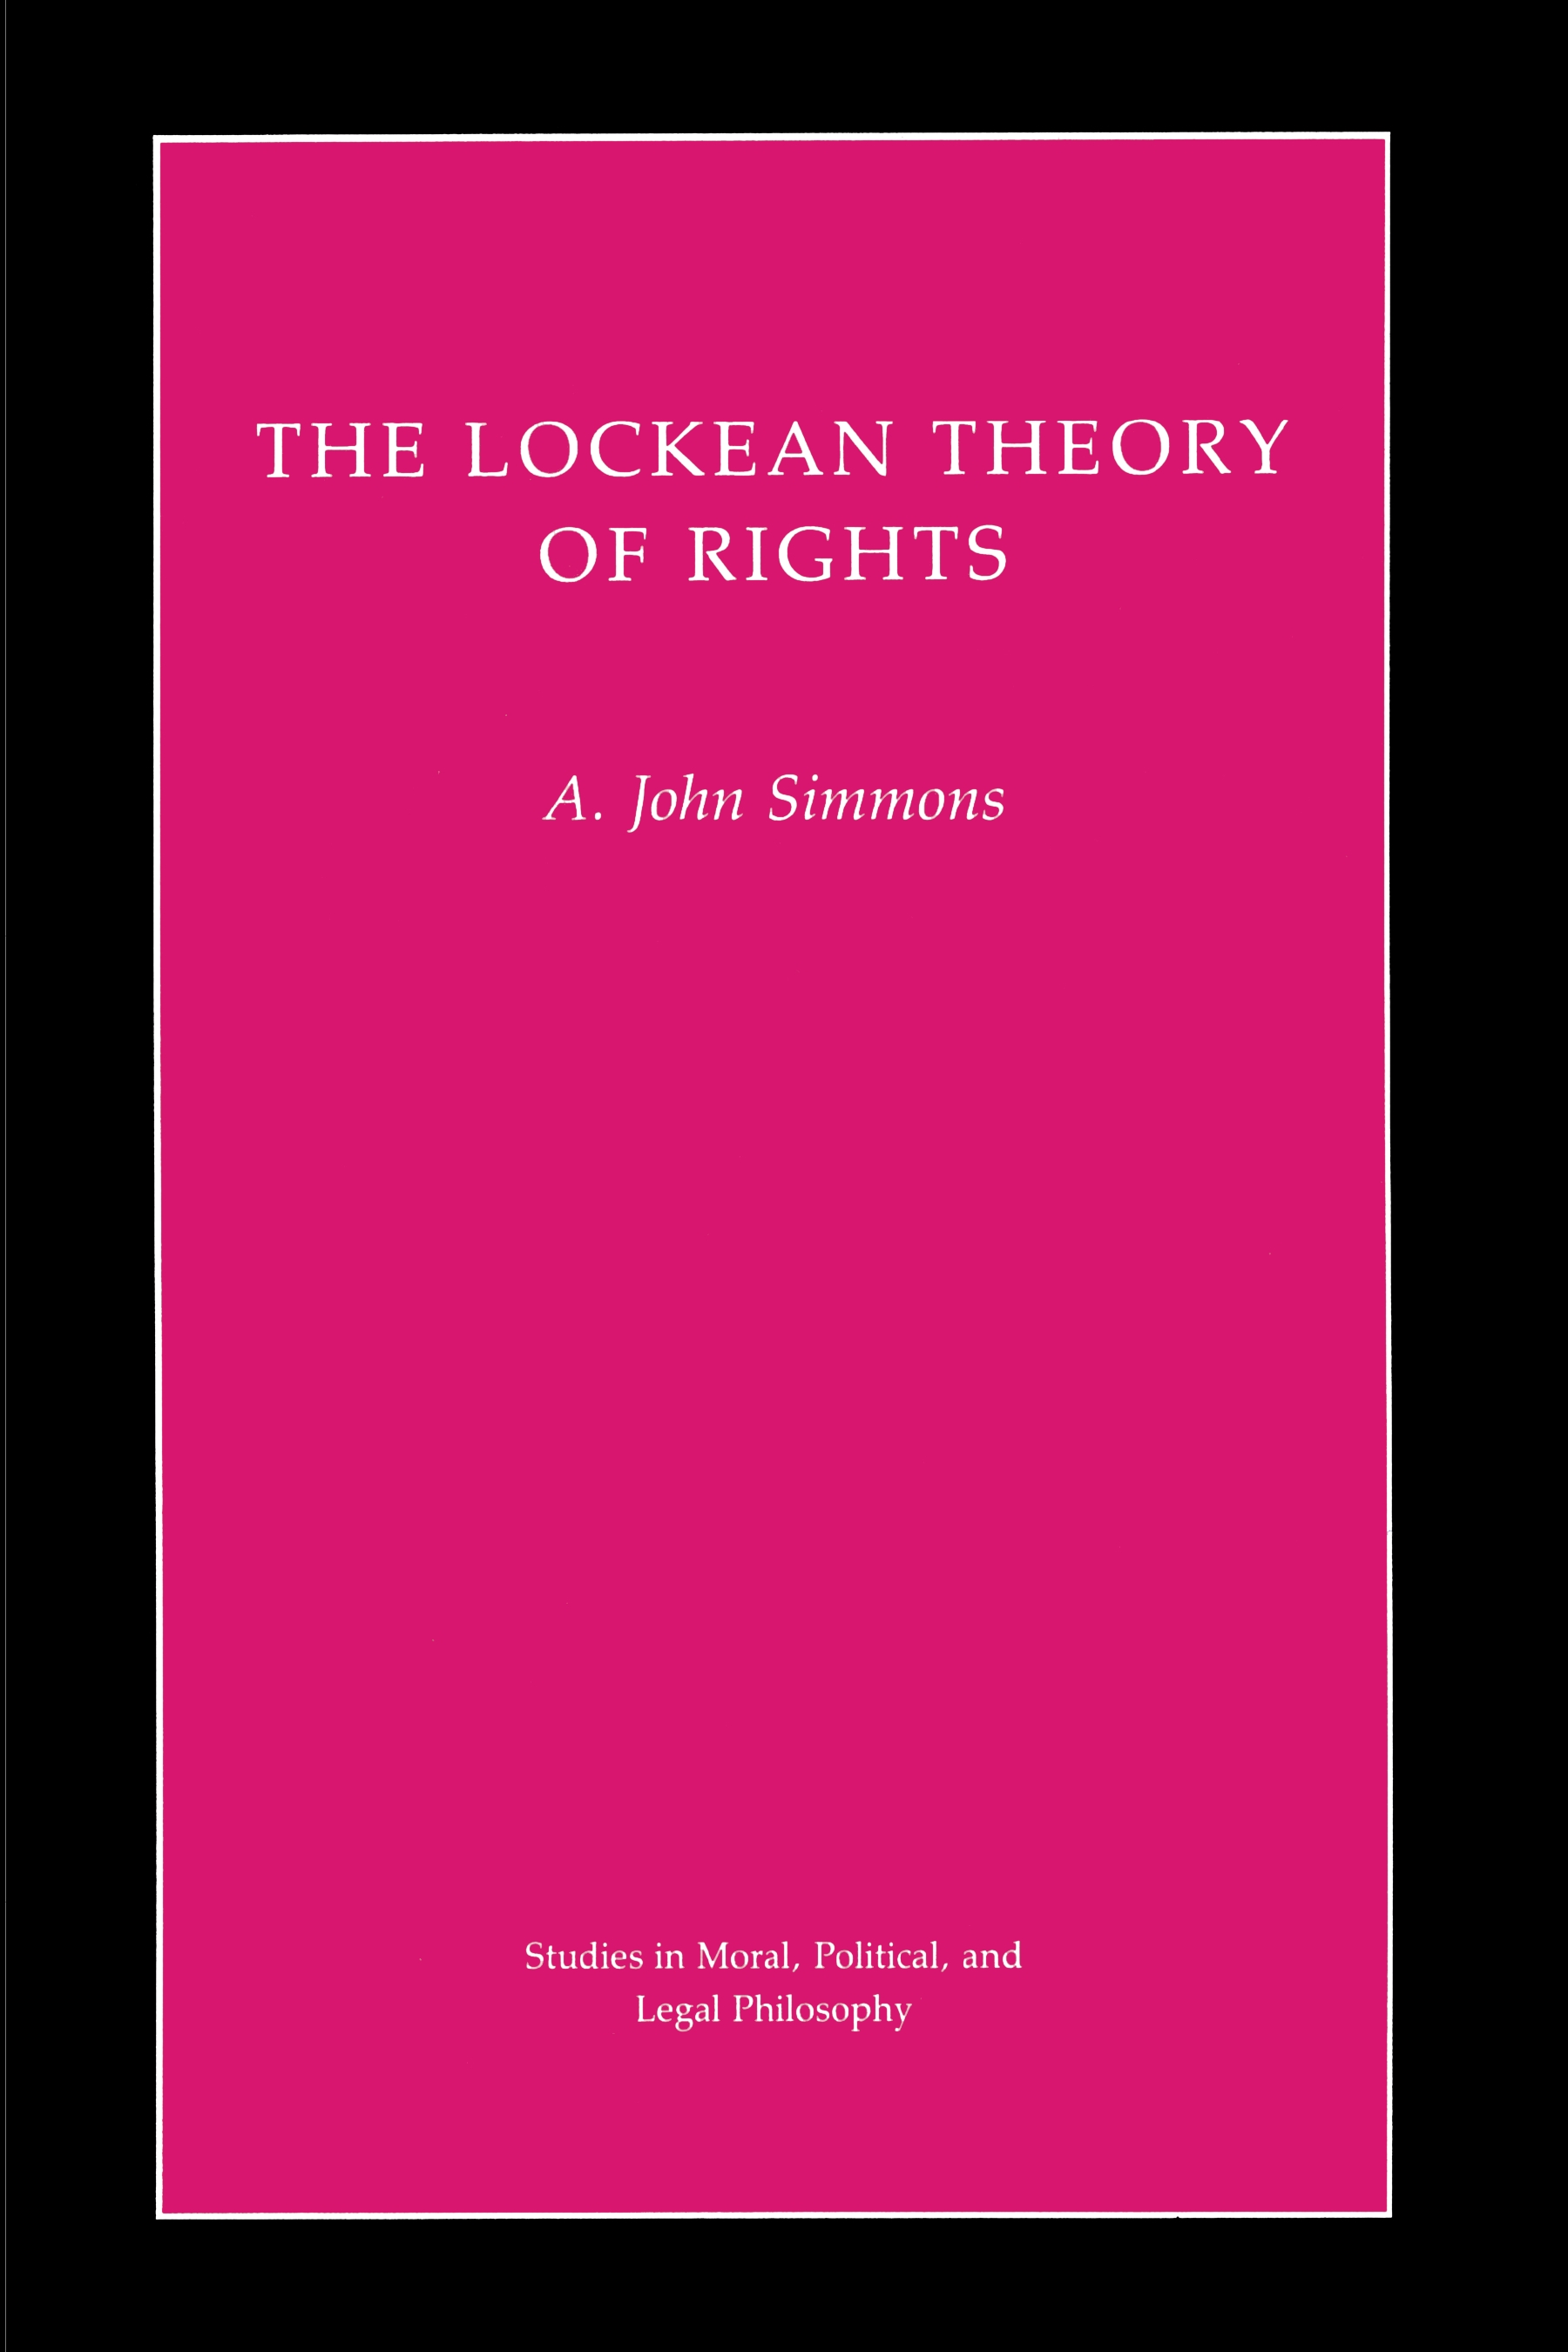 The Lockean Theory of Rights - 50-99.99